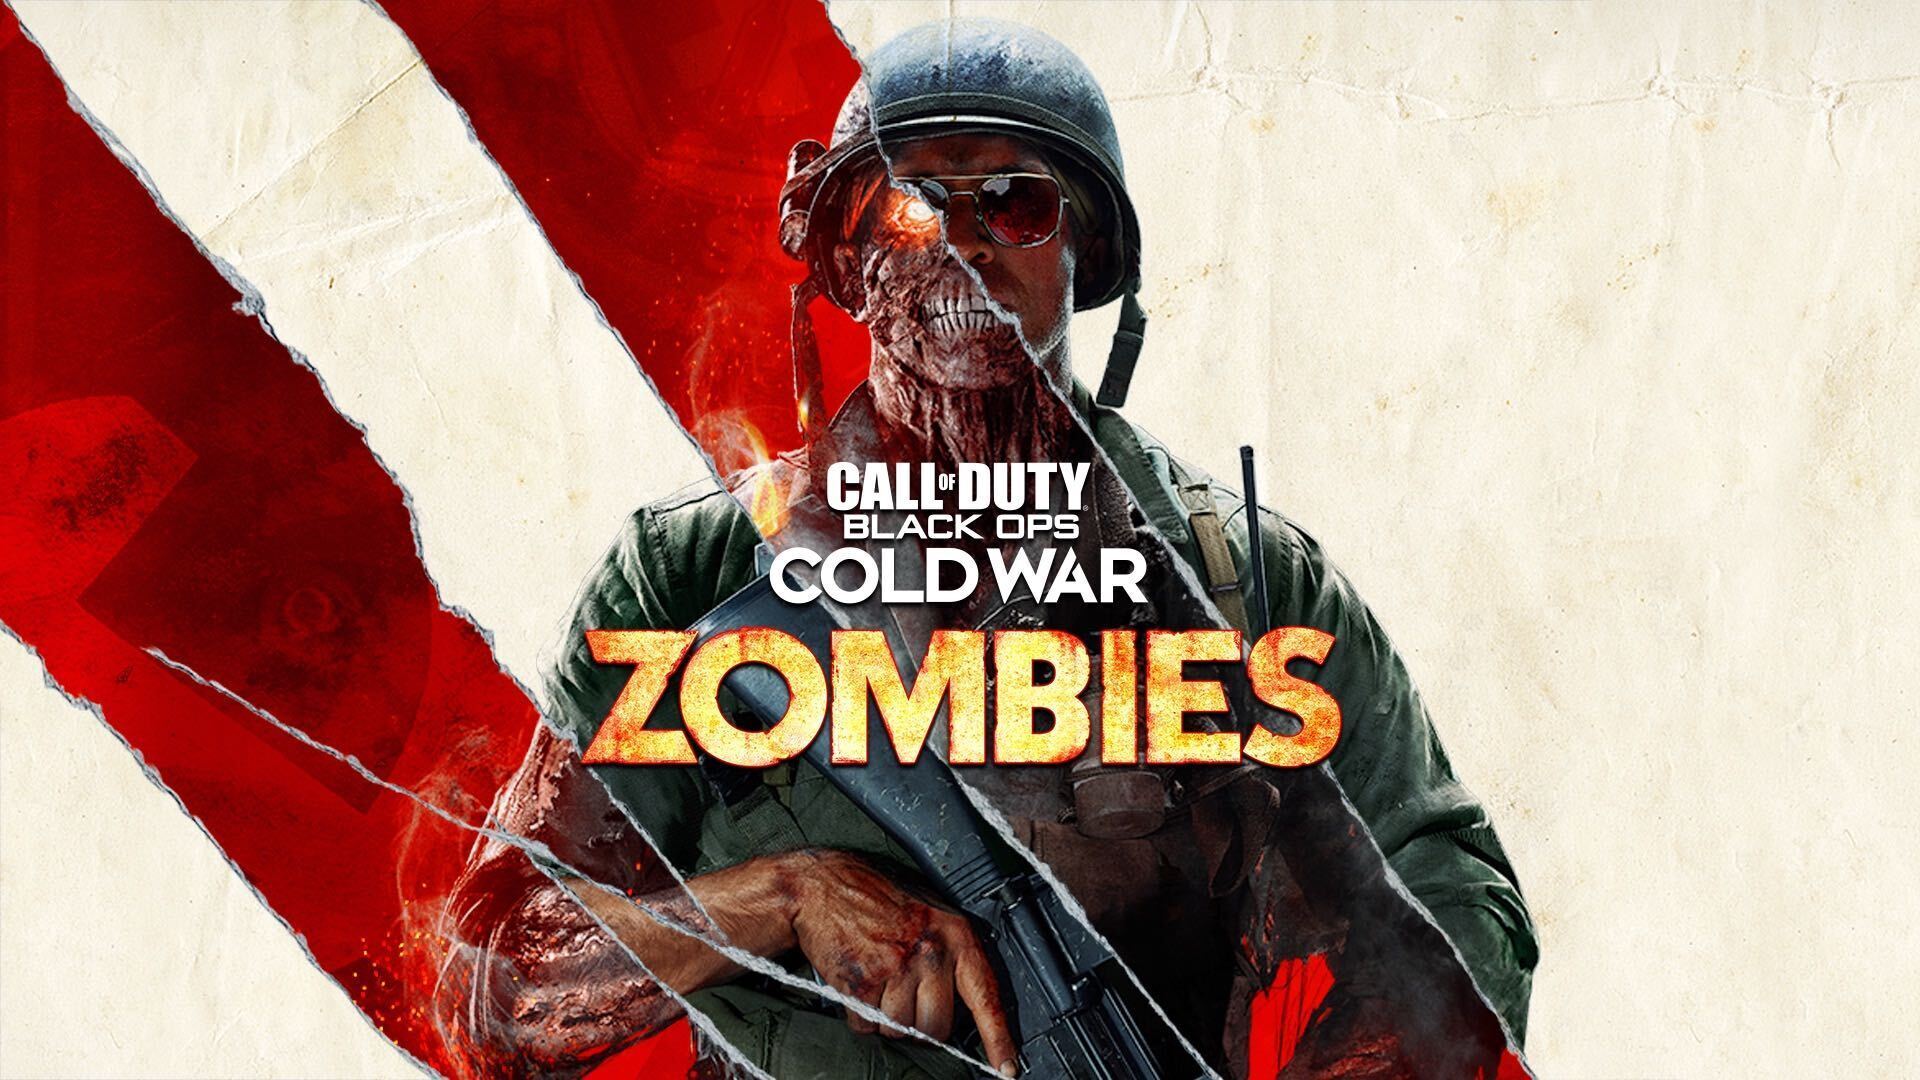 Black Ops Cold War Zombies – Story, Gameplay, Progression, & More